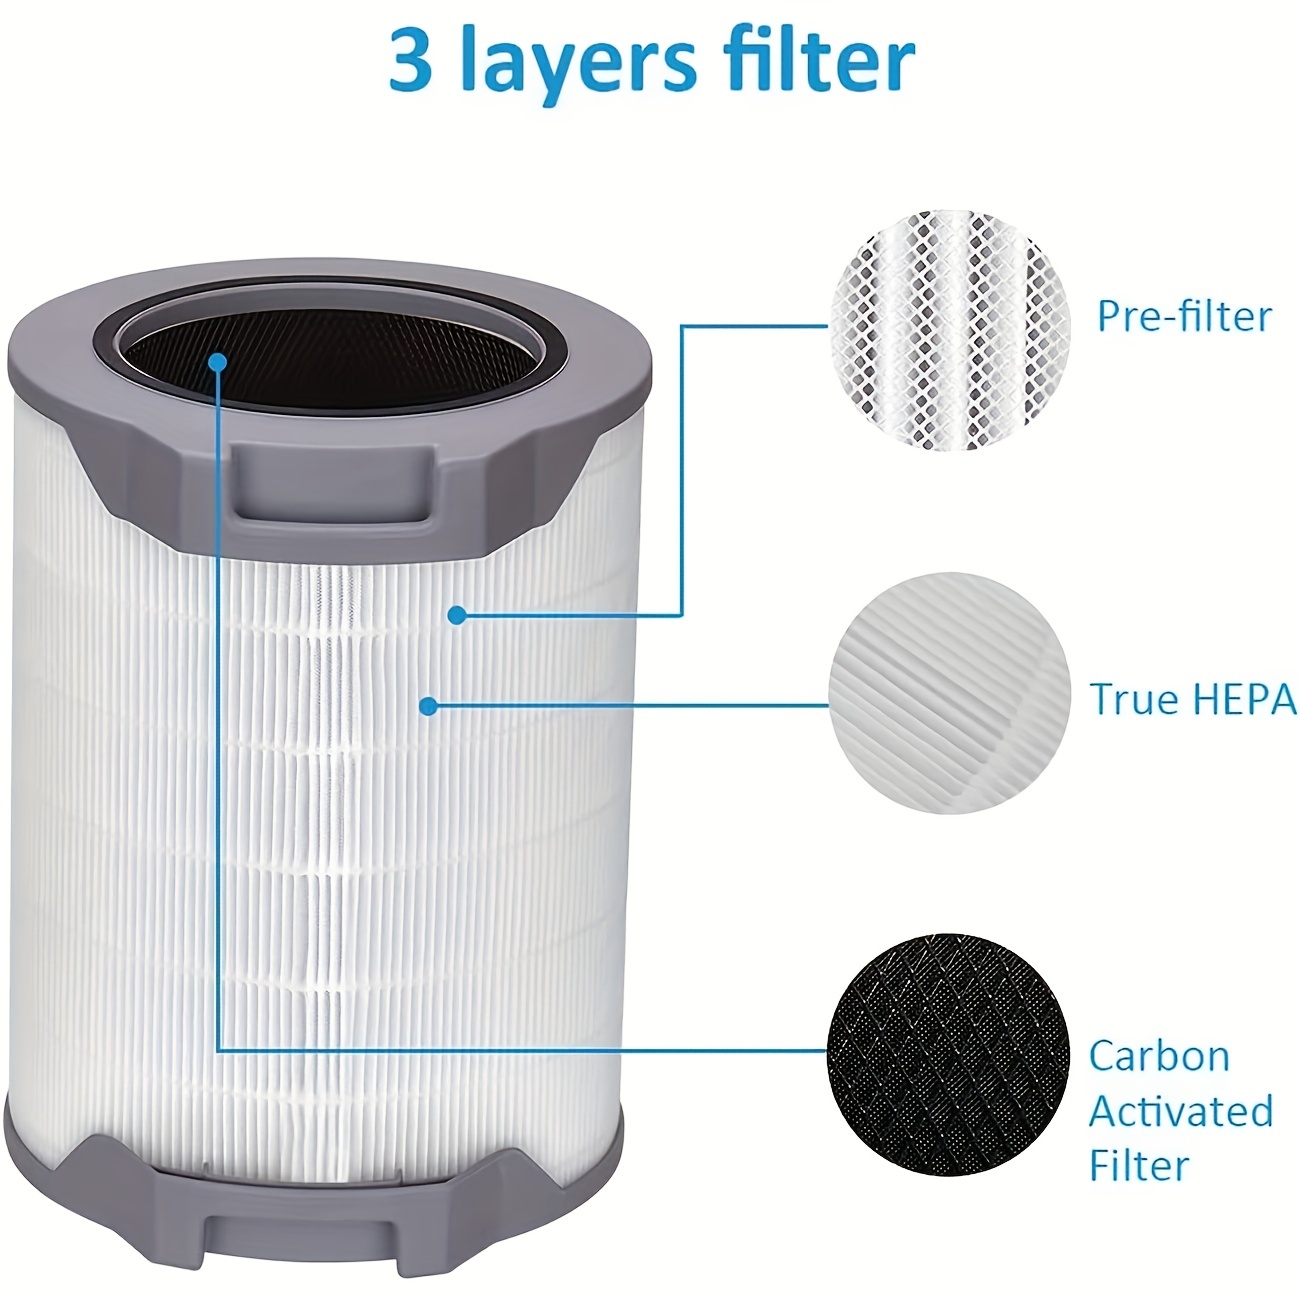  LEVOIT LV-H132 Air Purifier Replacement Filter, 3-in-1 Nylon  Pre-Filter, HEPA Filter, High-Efficiency Activated Carbon Filter, LV-H132-RF,  4 Pack : Home & Kitchen